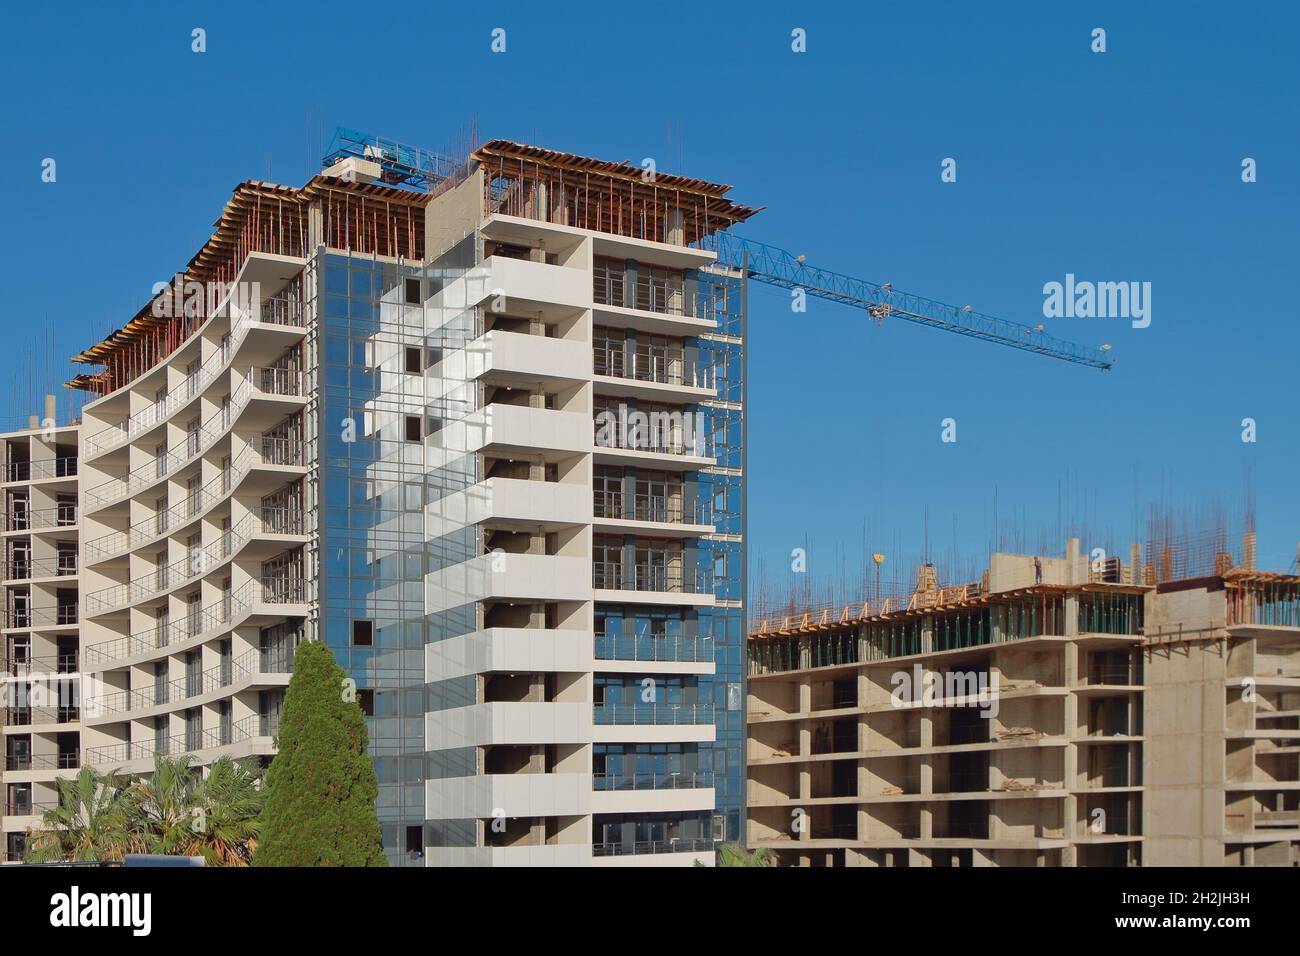 Unfinished multistory building. Adler, Sochi, Russia Stock Photo